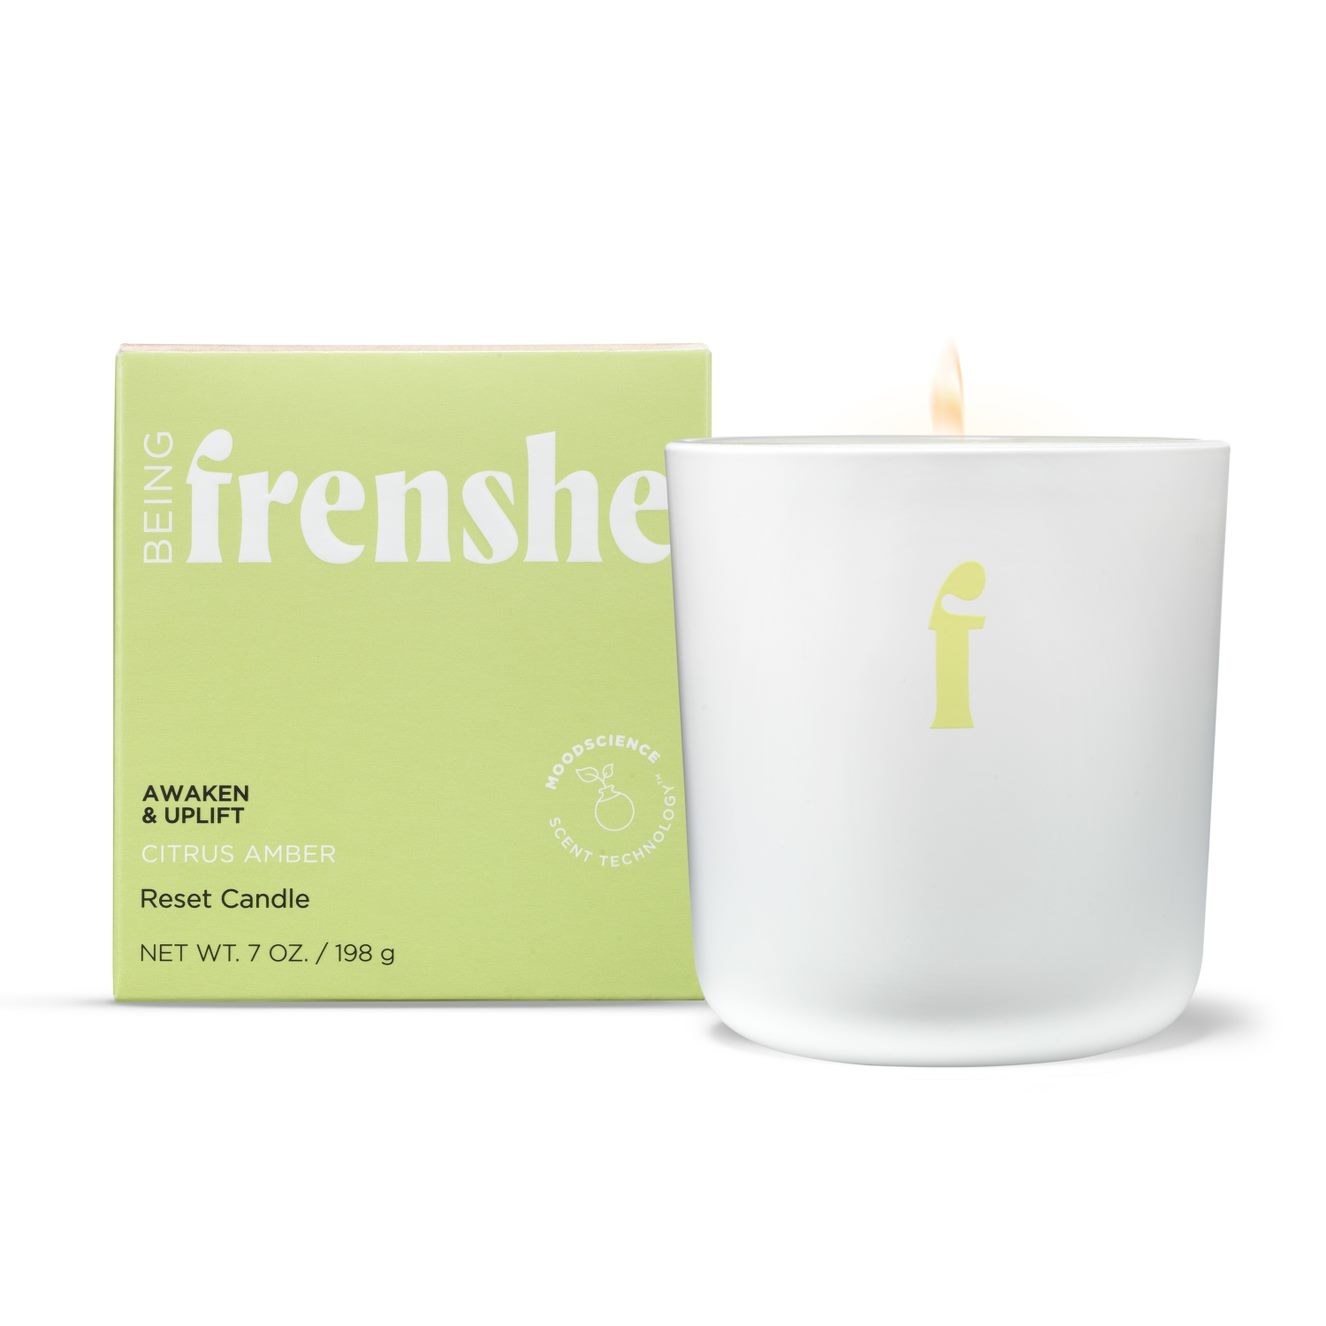 Being Frenshe Reset Candle In Citrus Amber